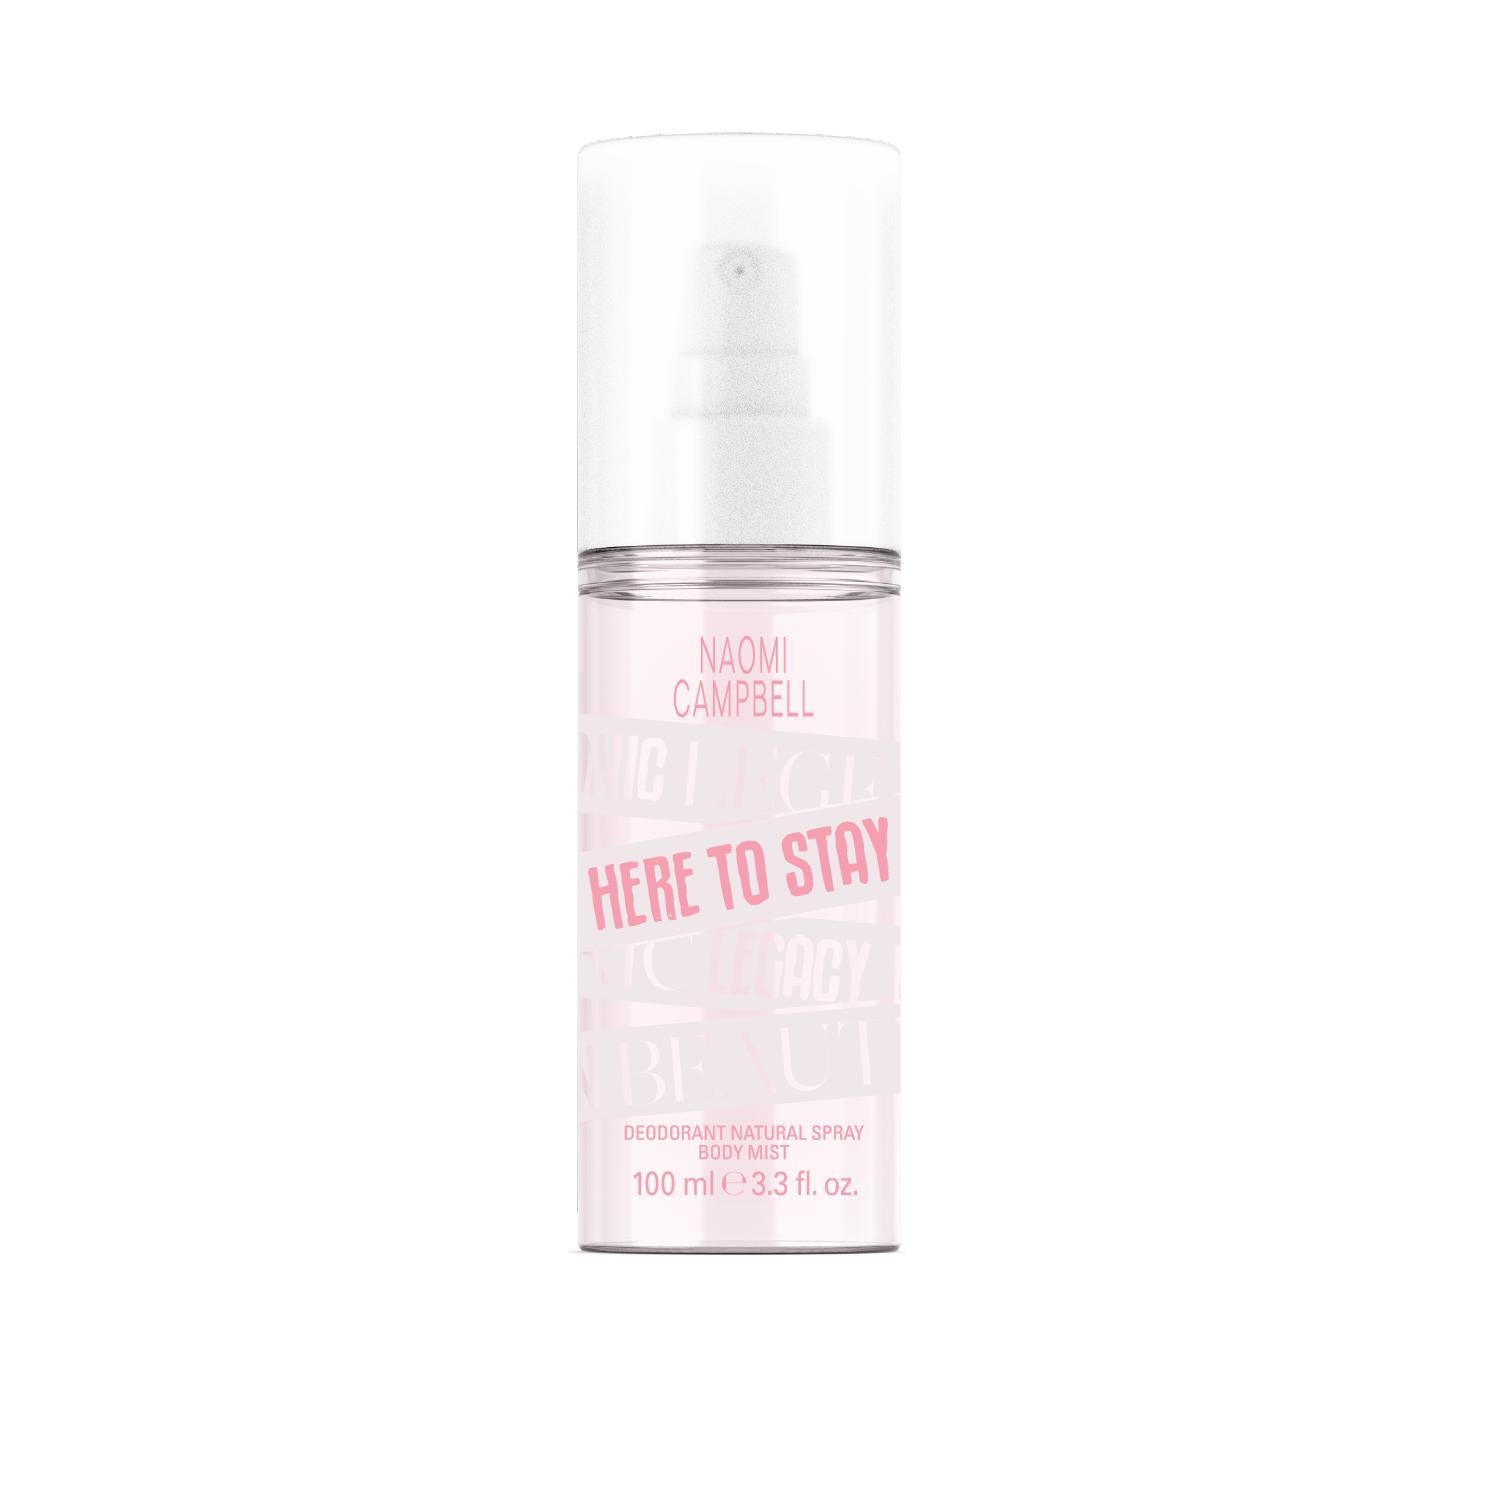 Naomi Campell Here to stay body mist 100ml